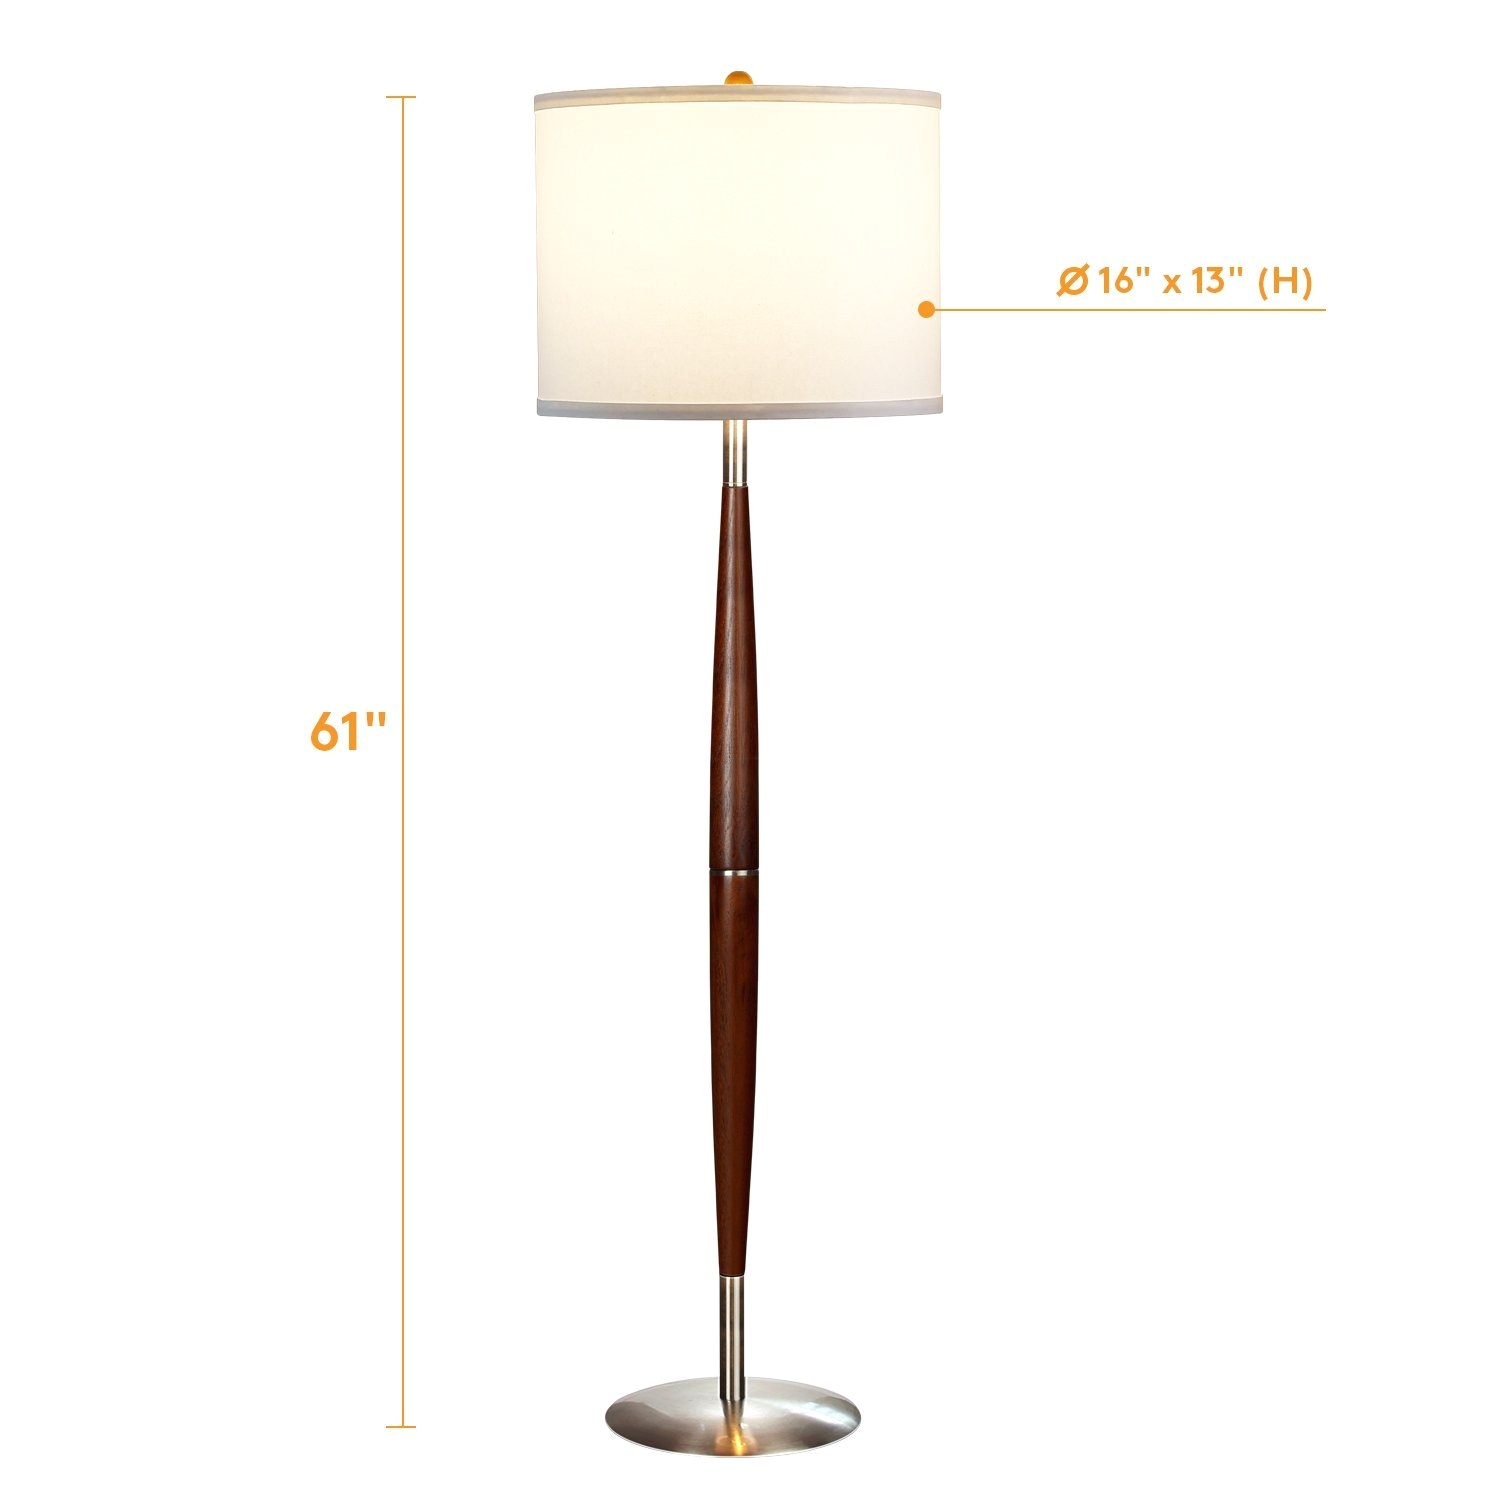 brightech lucas led pole floor lamp modern living room light fits beside the sofa in corners tall standing drum shade lighting for offices